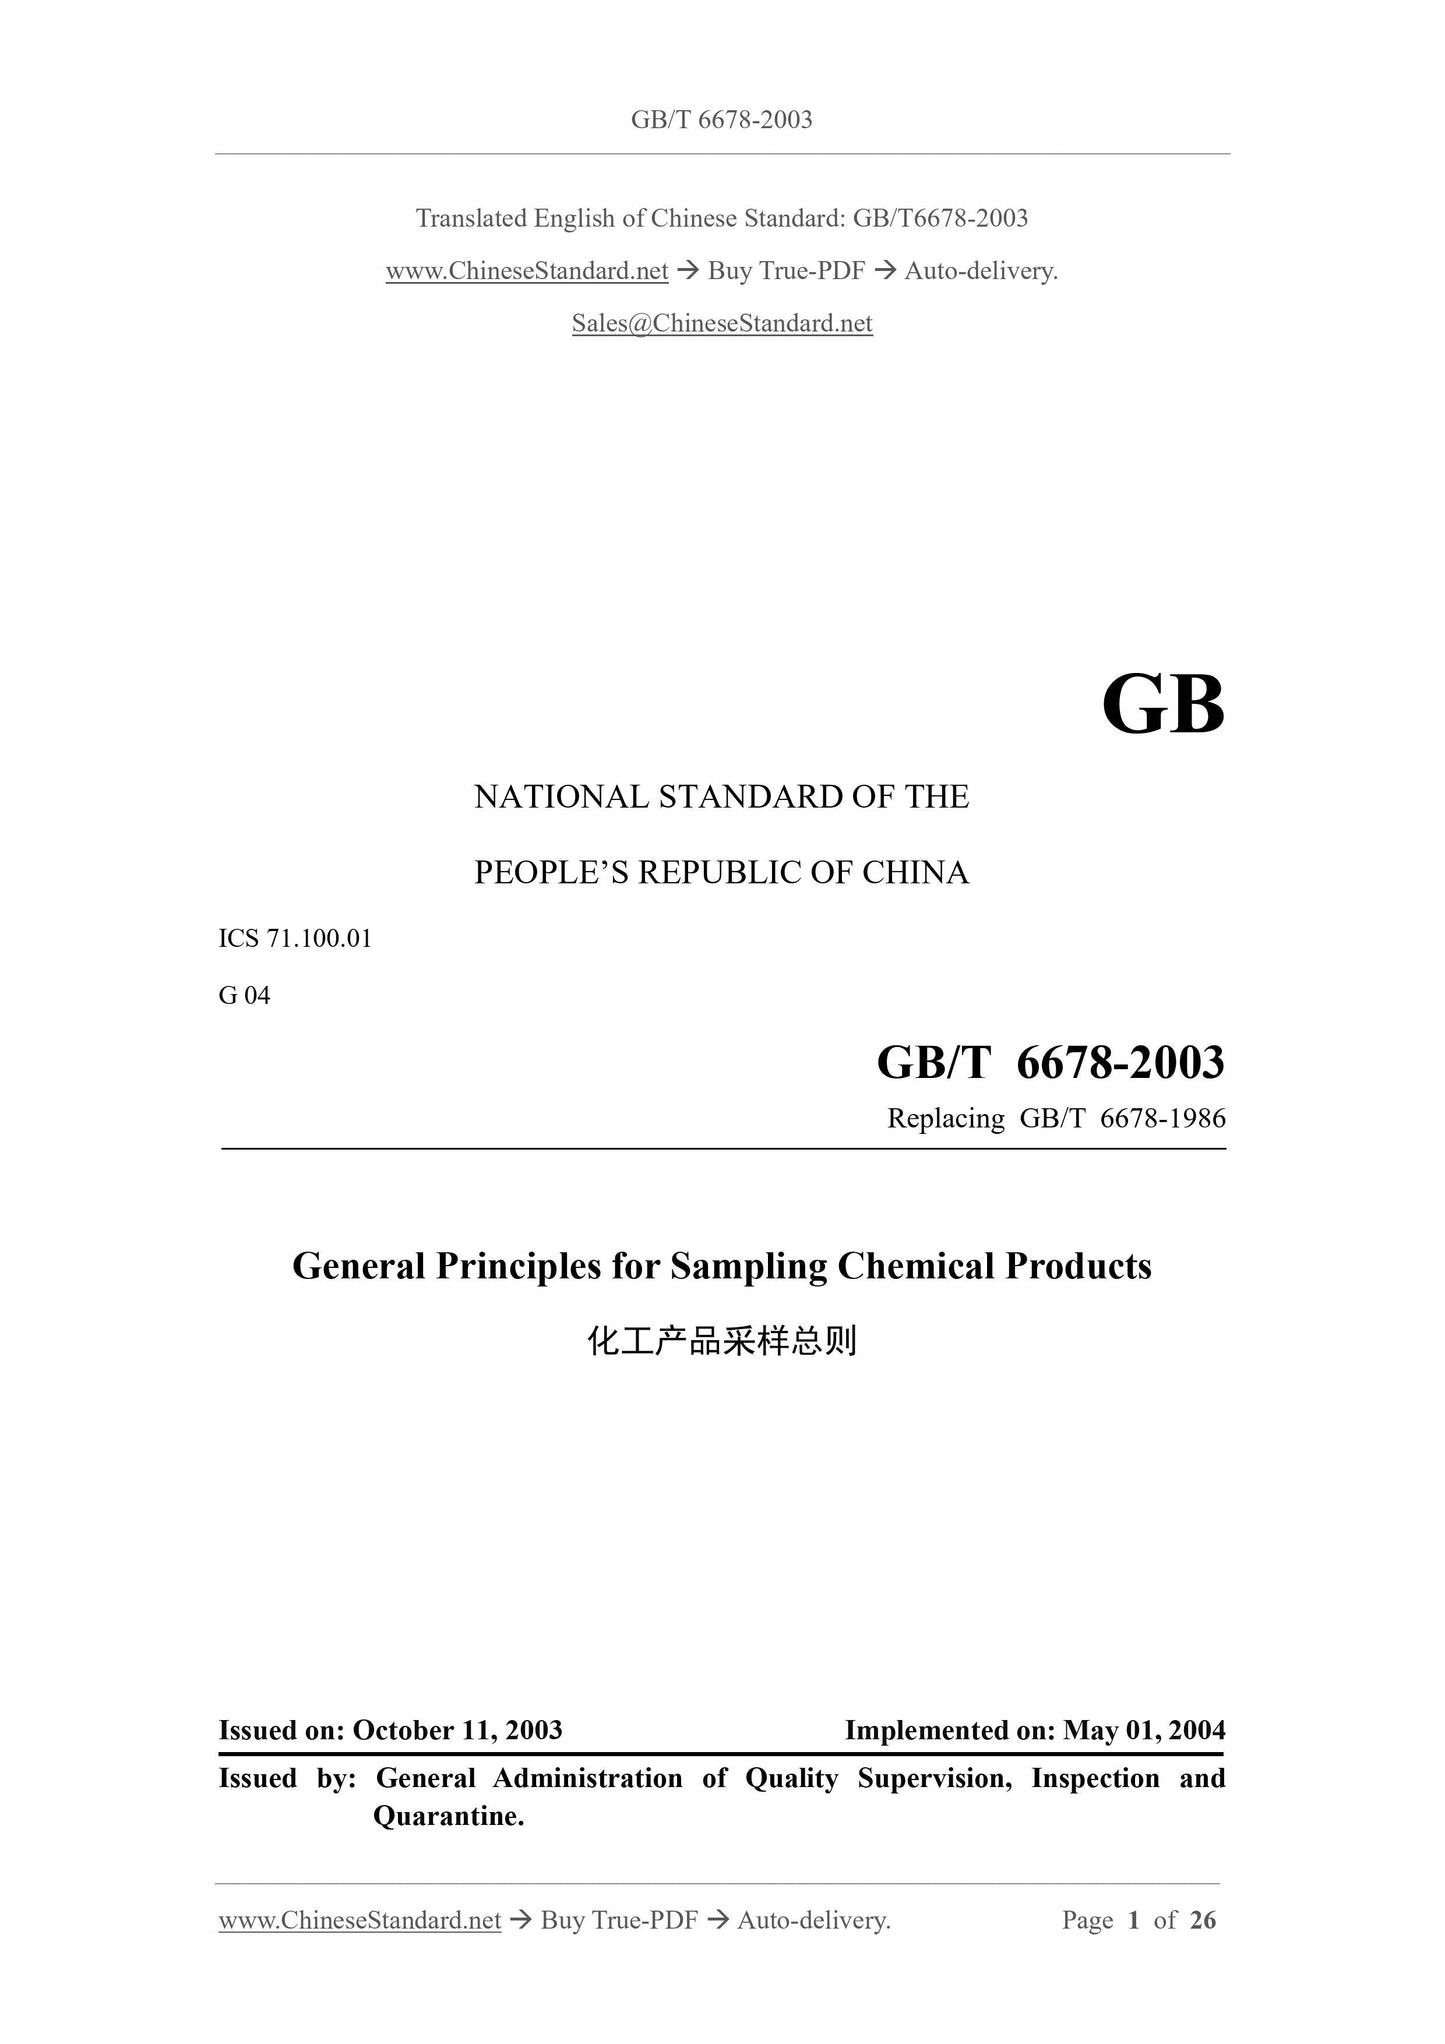 GB/T 6678-2003 Page 1